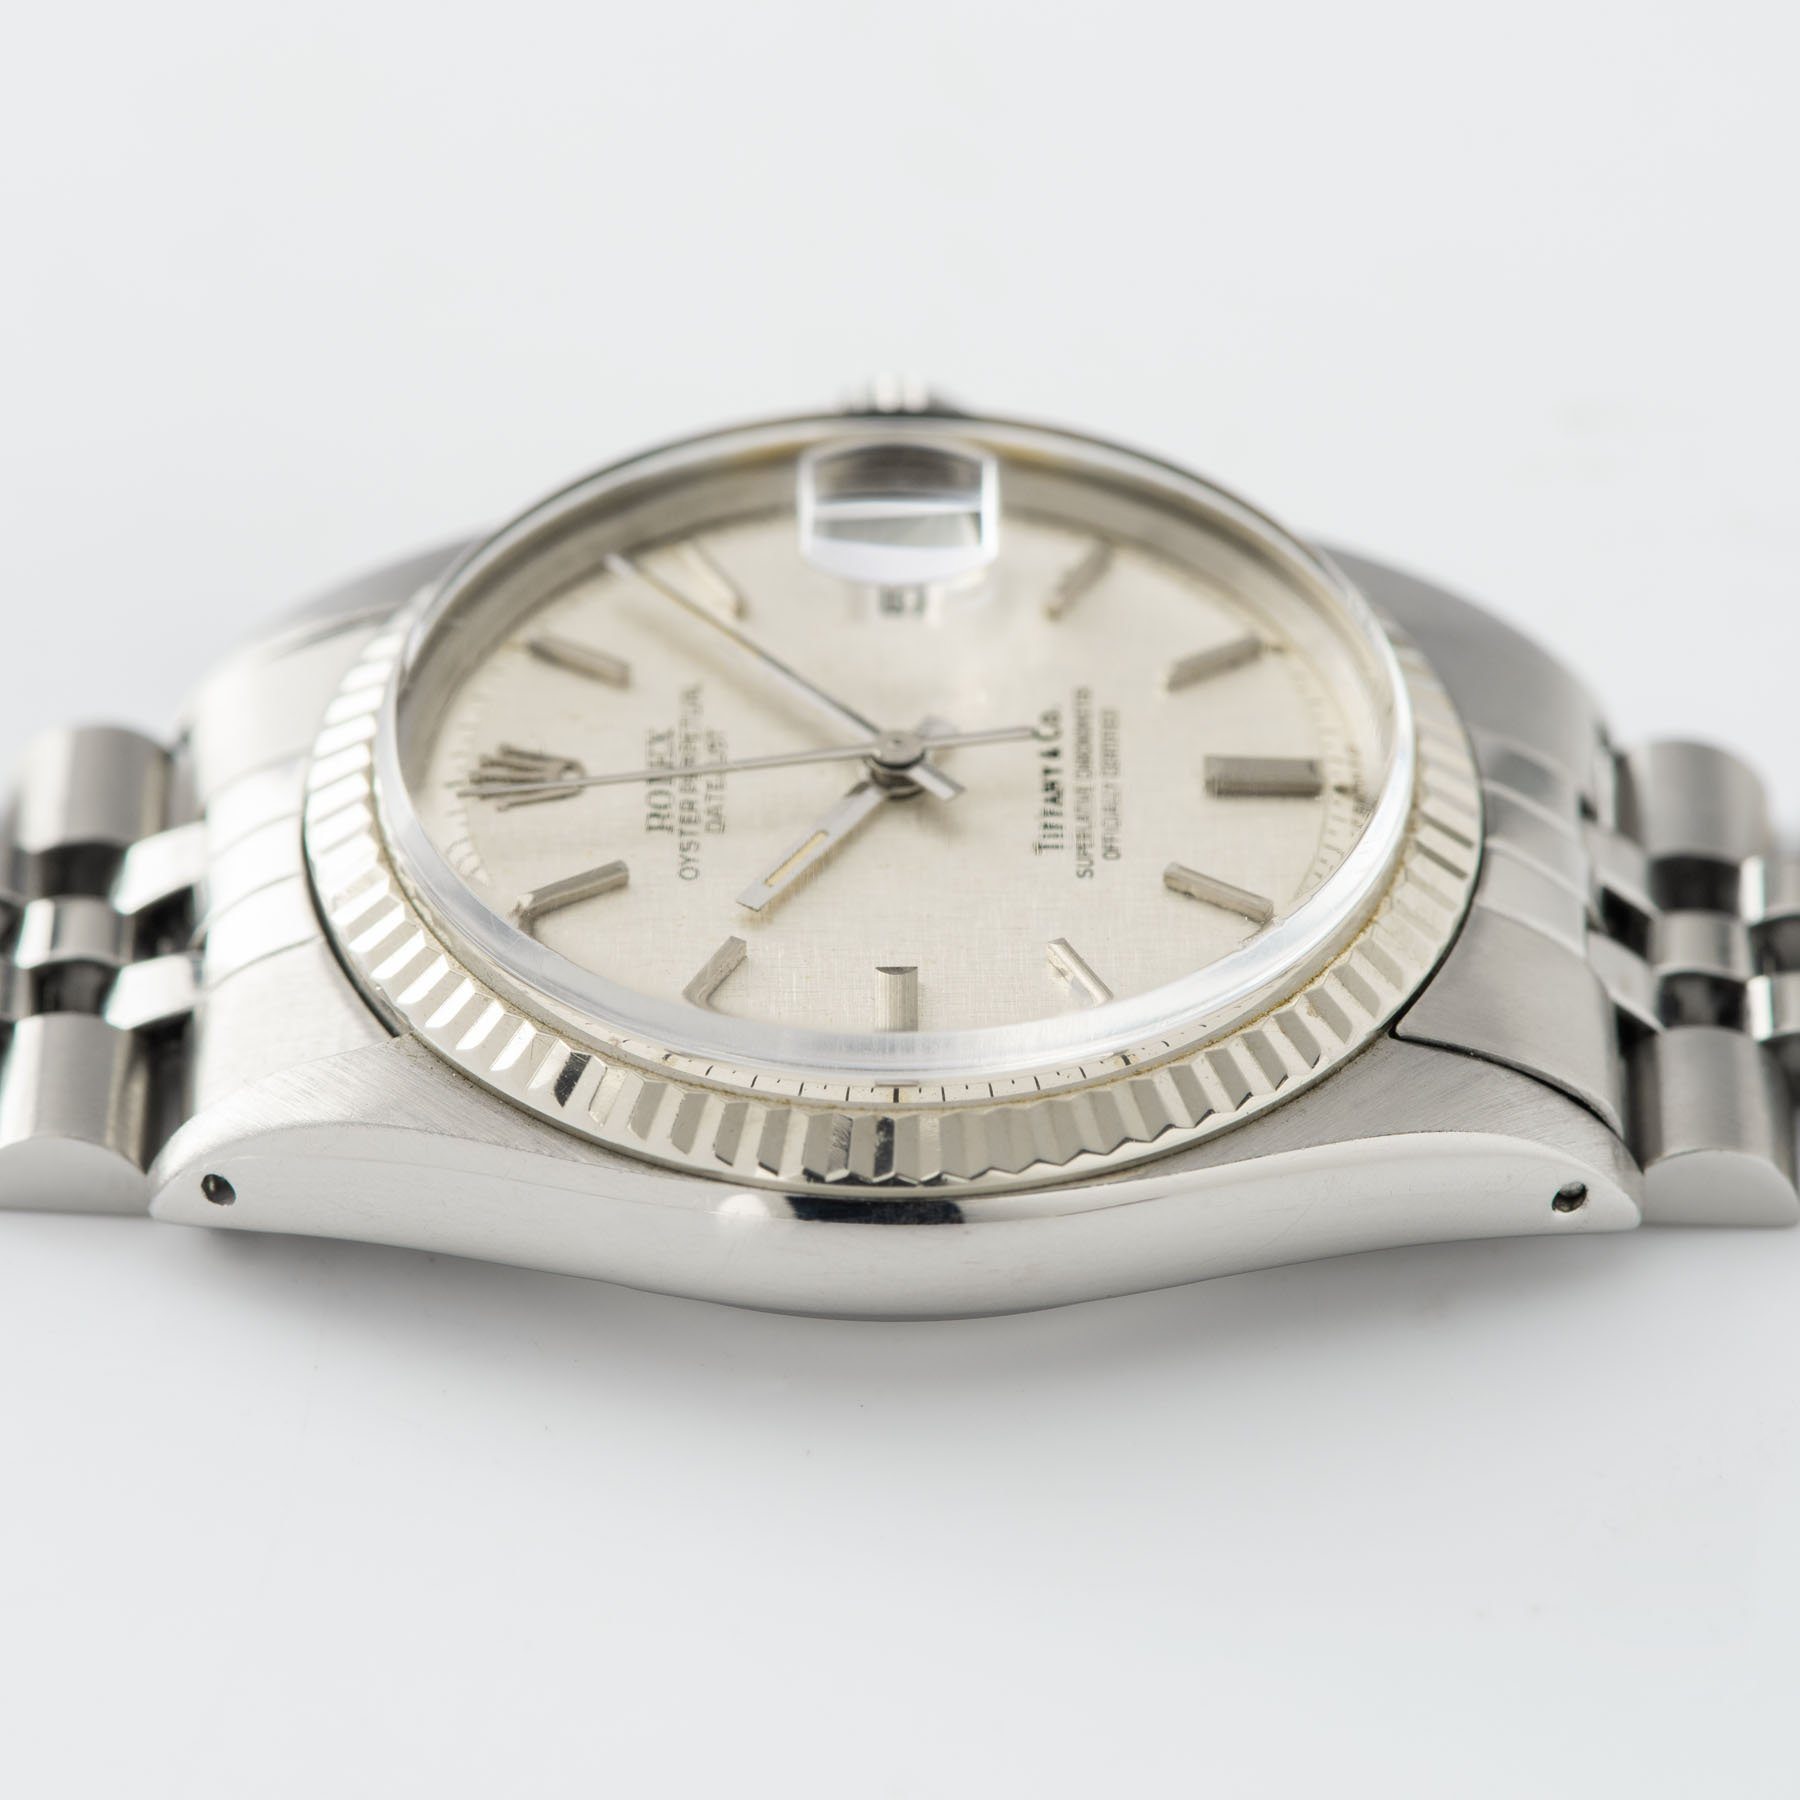 Rolex Datejust Tiffany Dial Reference 1601